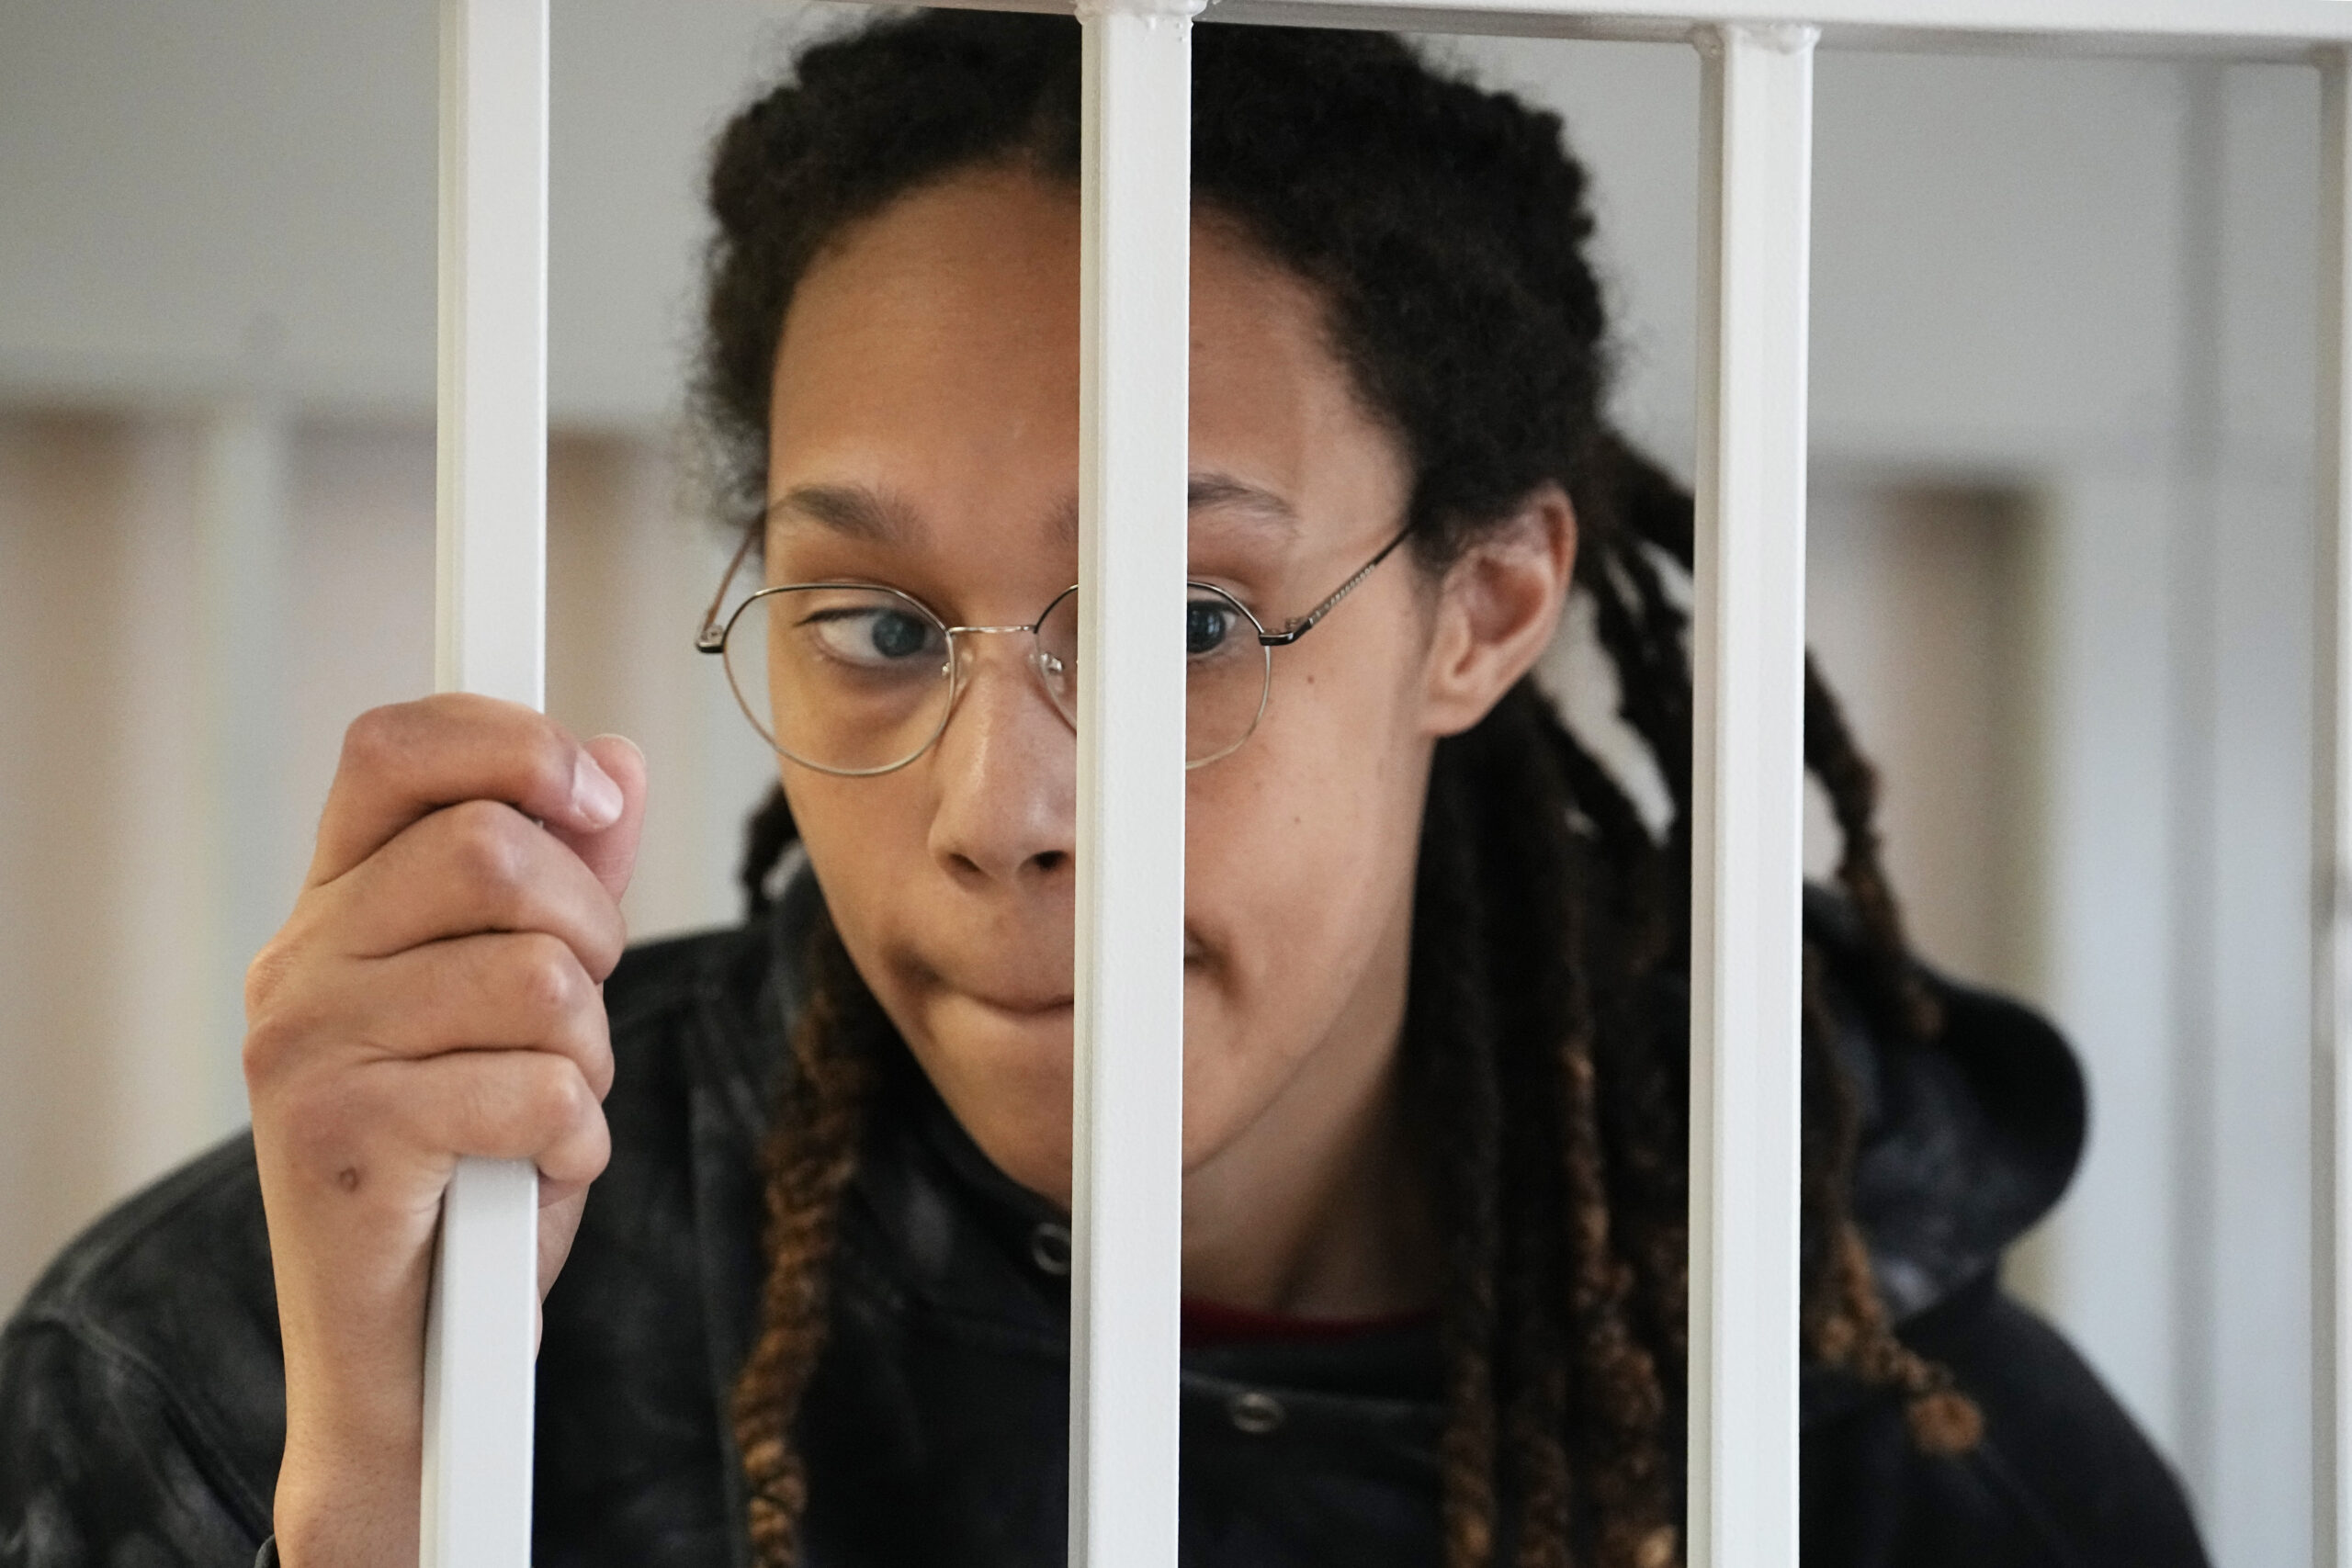 WNBA star and two-time Olympic gold medalist Brittney Griner stands in a cage at a court room prior to a hearing, in Khimki just outside Moscow, Russia, Tuesday, July 26, 2022. American basketball star Brittney Griner has returned to a Russian courtroom for her drawn-out trial on drug charges that could bring her 10 years in prison if convicted. (AP Photo/Alexander Zemlianichenko, Pool)